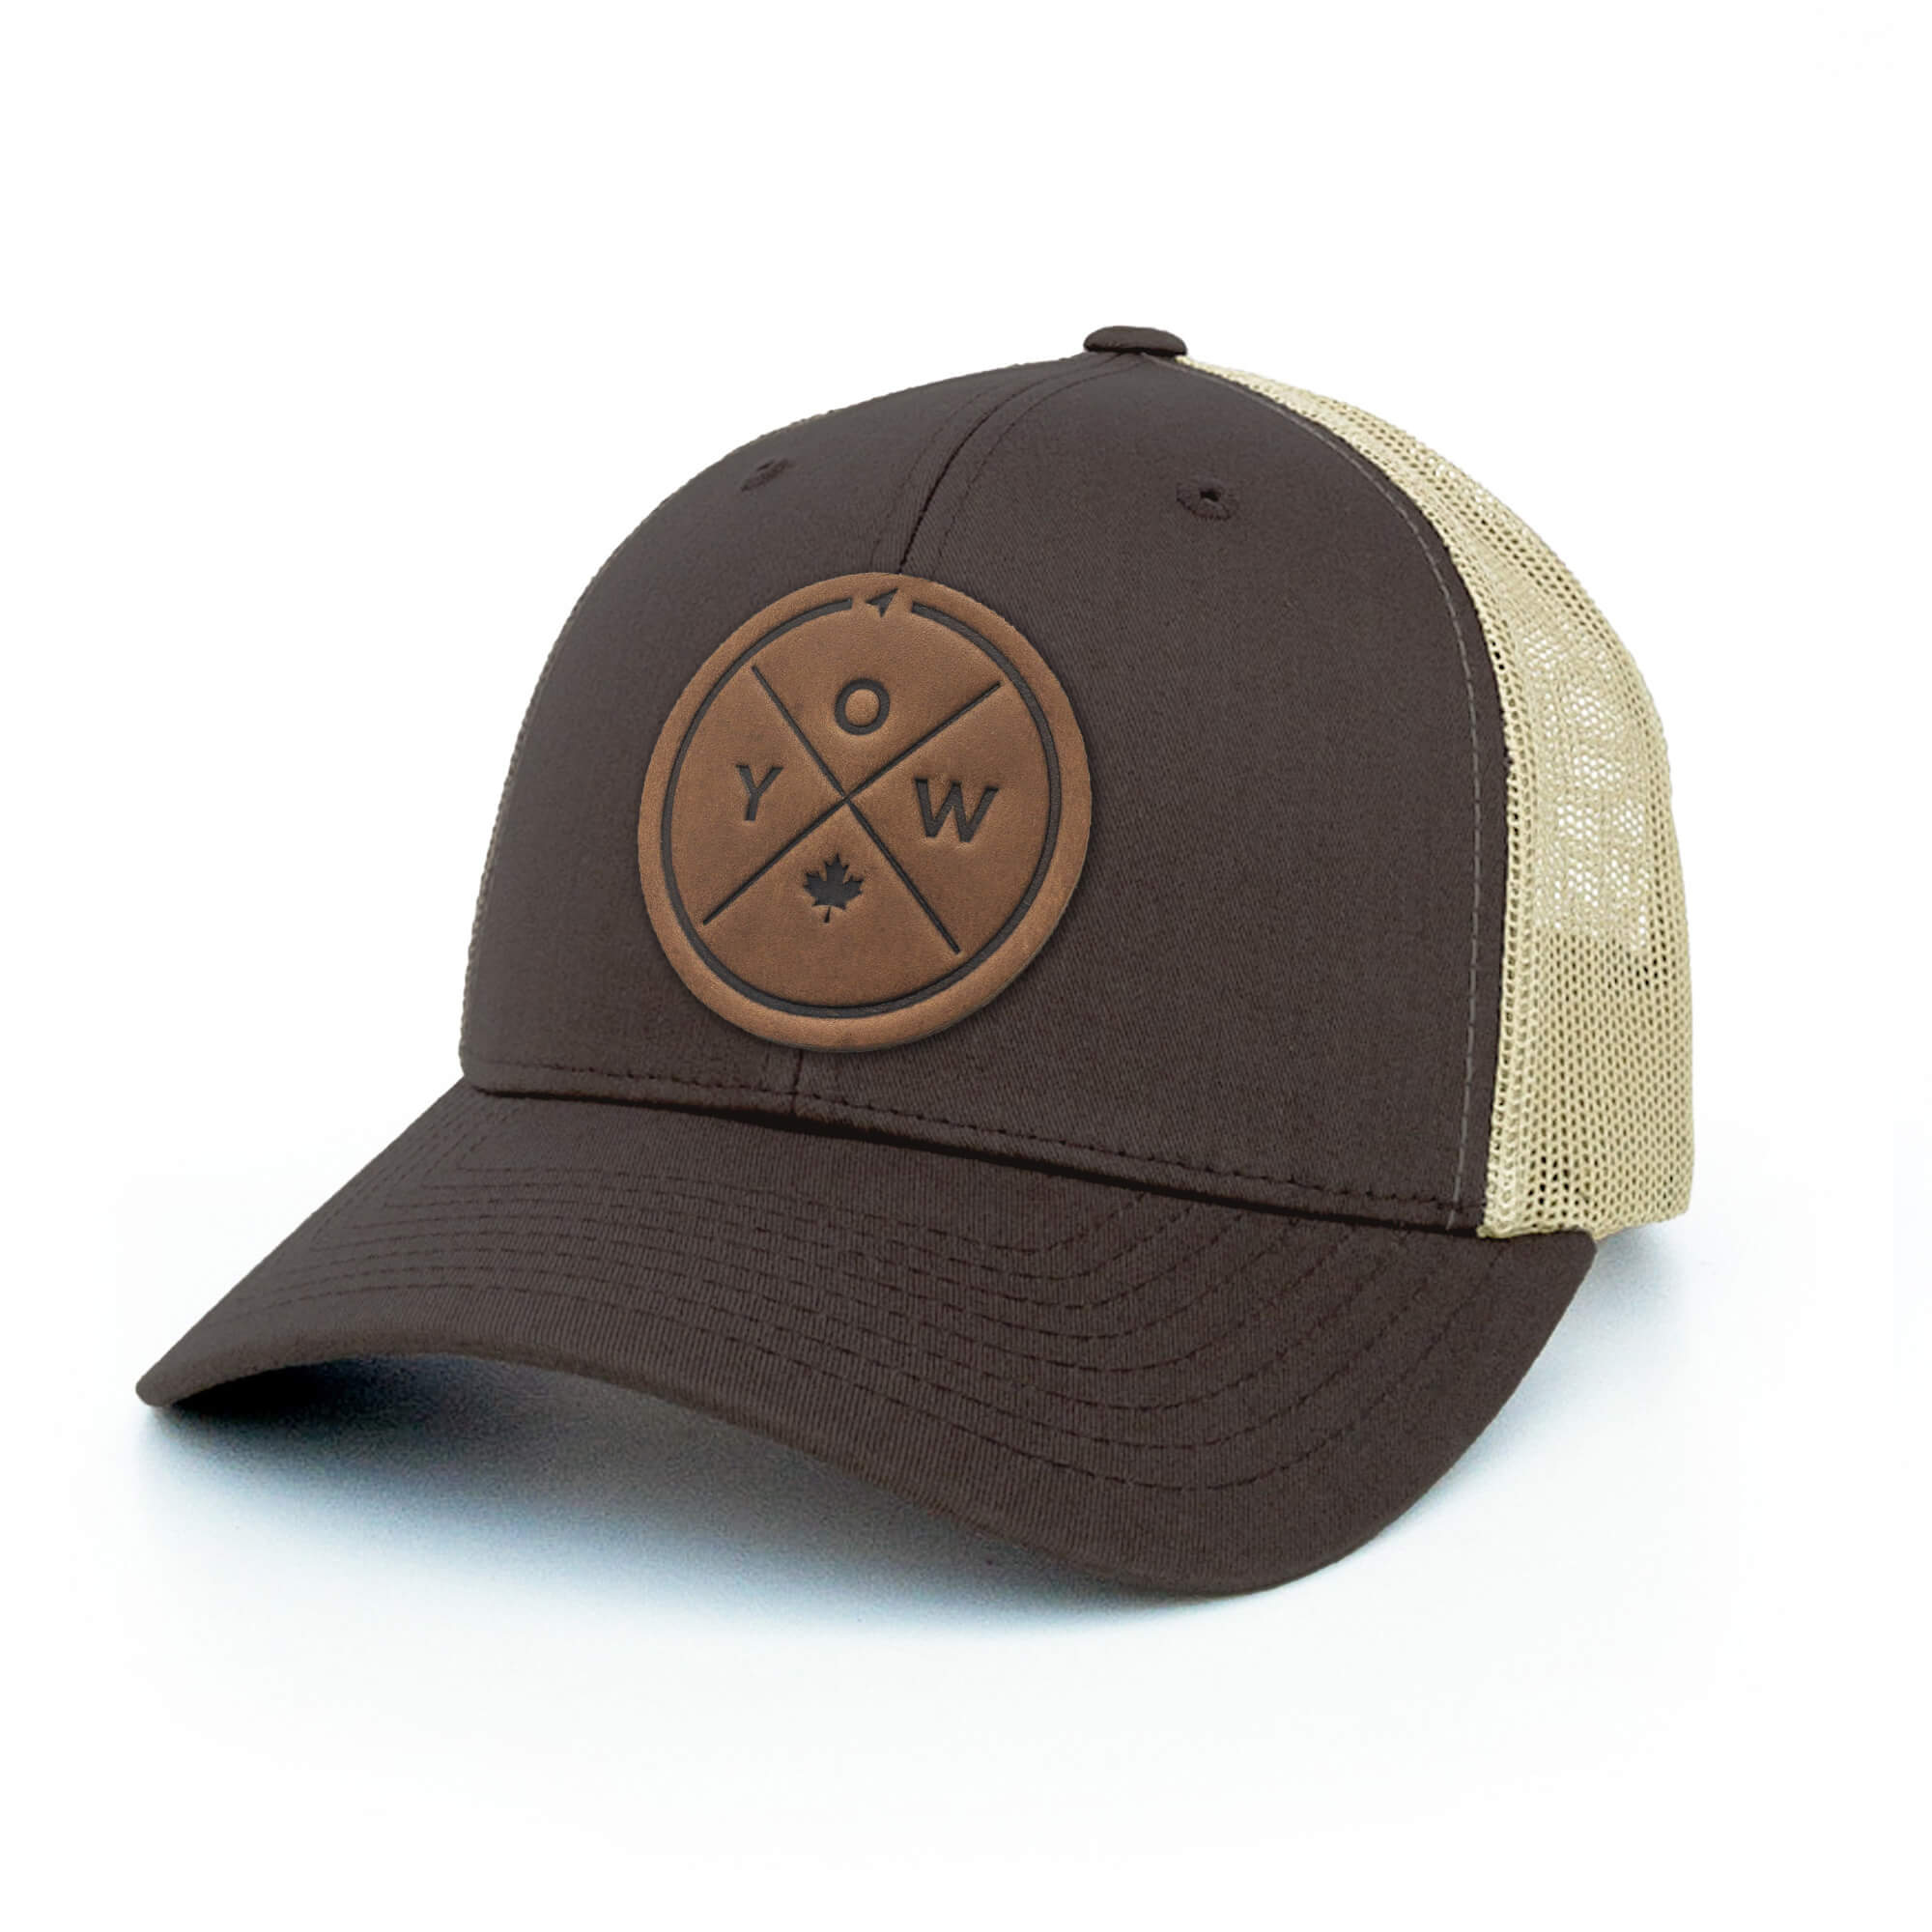 Brown and khaki trucker hat with full-grain leather patch with YOW embossing | BLACK-002-008, CHARC-002-008, NAVY-002-008, HGREY-002-008, MOSS-002-008, BROWN-002-008